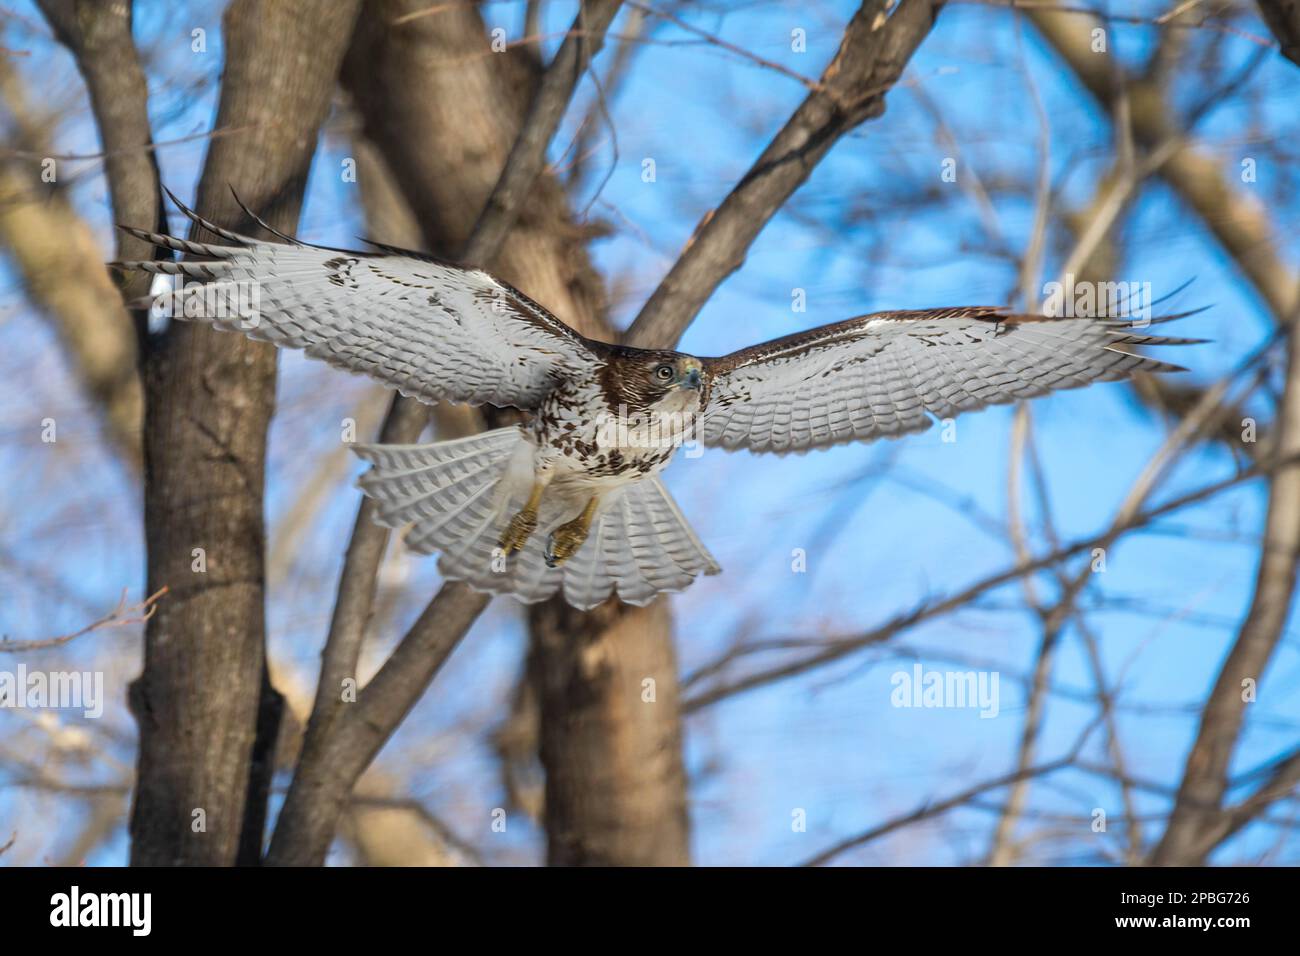 A juvenile Red-tailed Hawk preys upon an unsuspecting squirrel in the northern winter forests of Minnesota Stock Photo